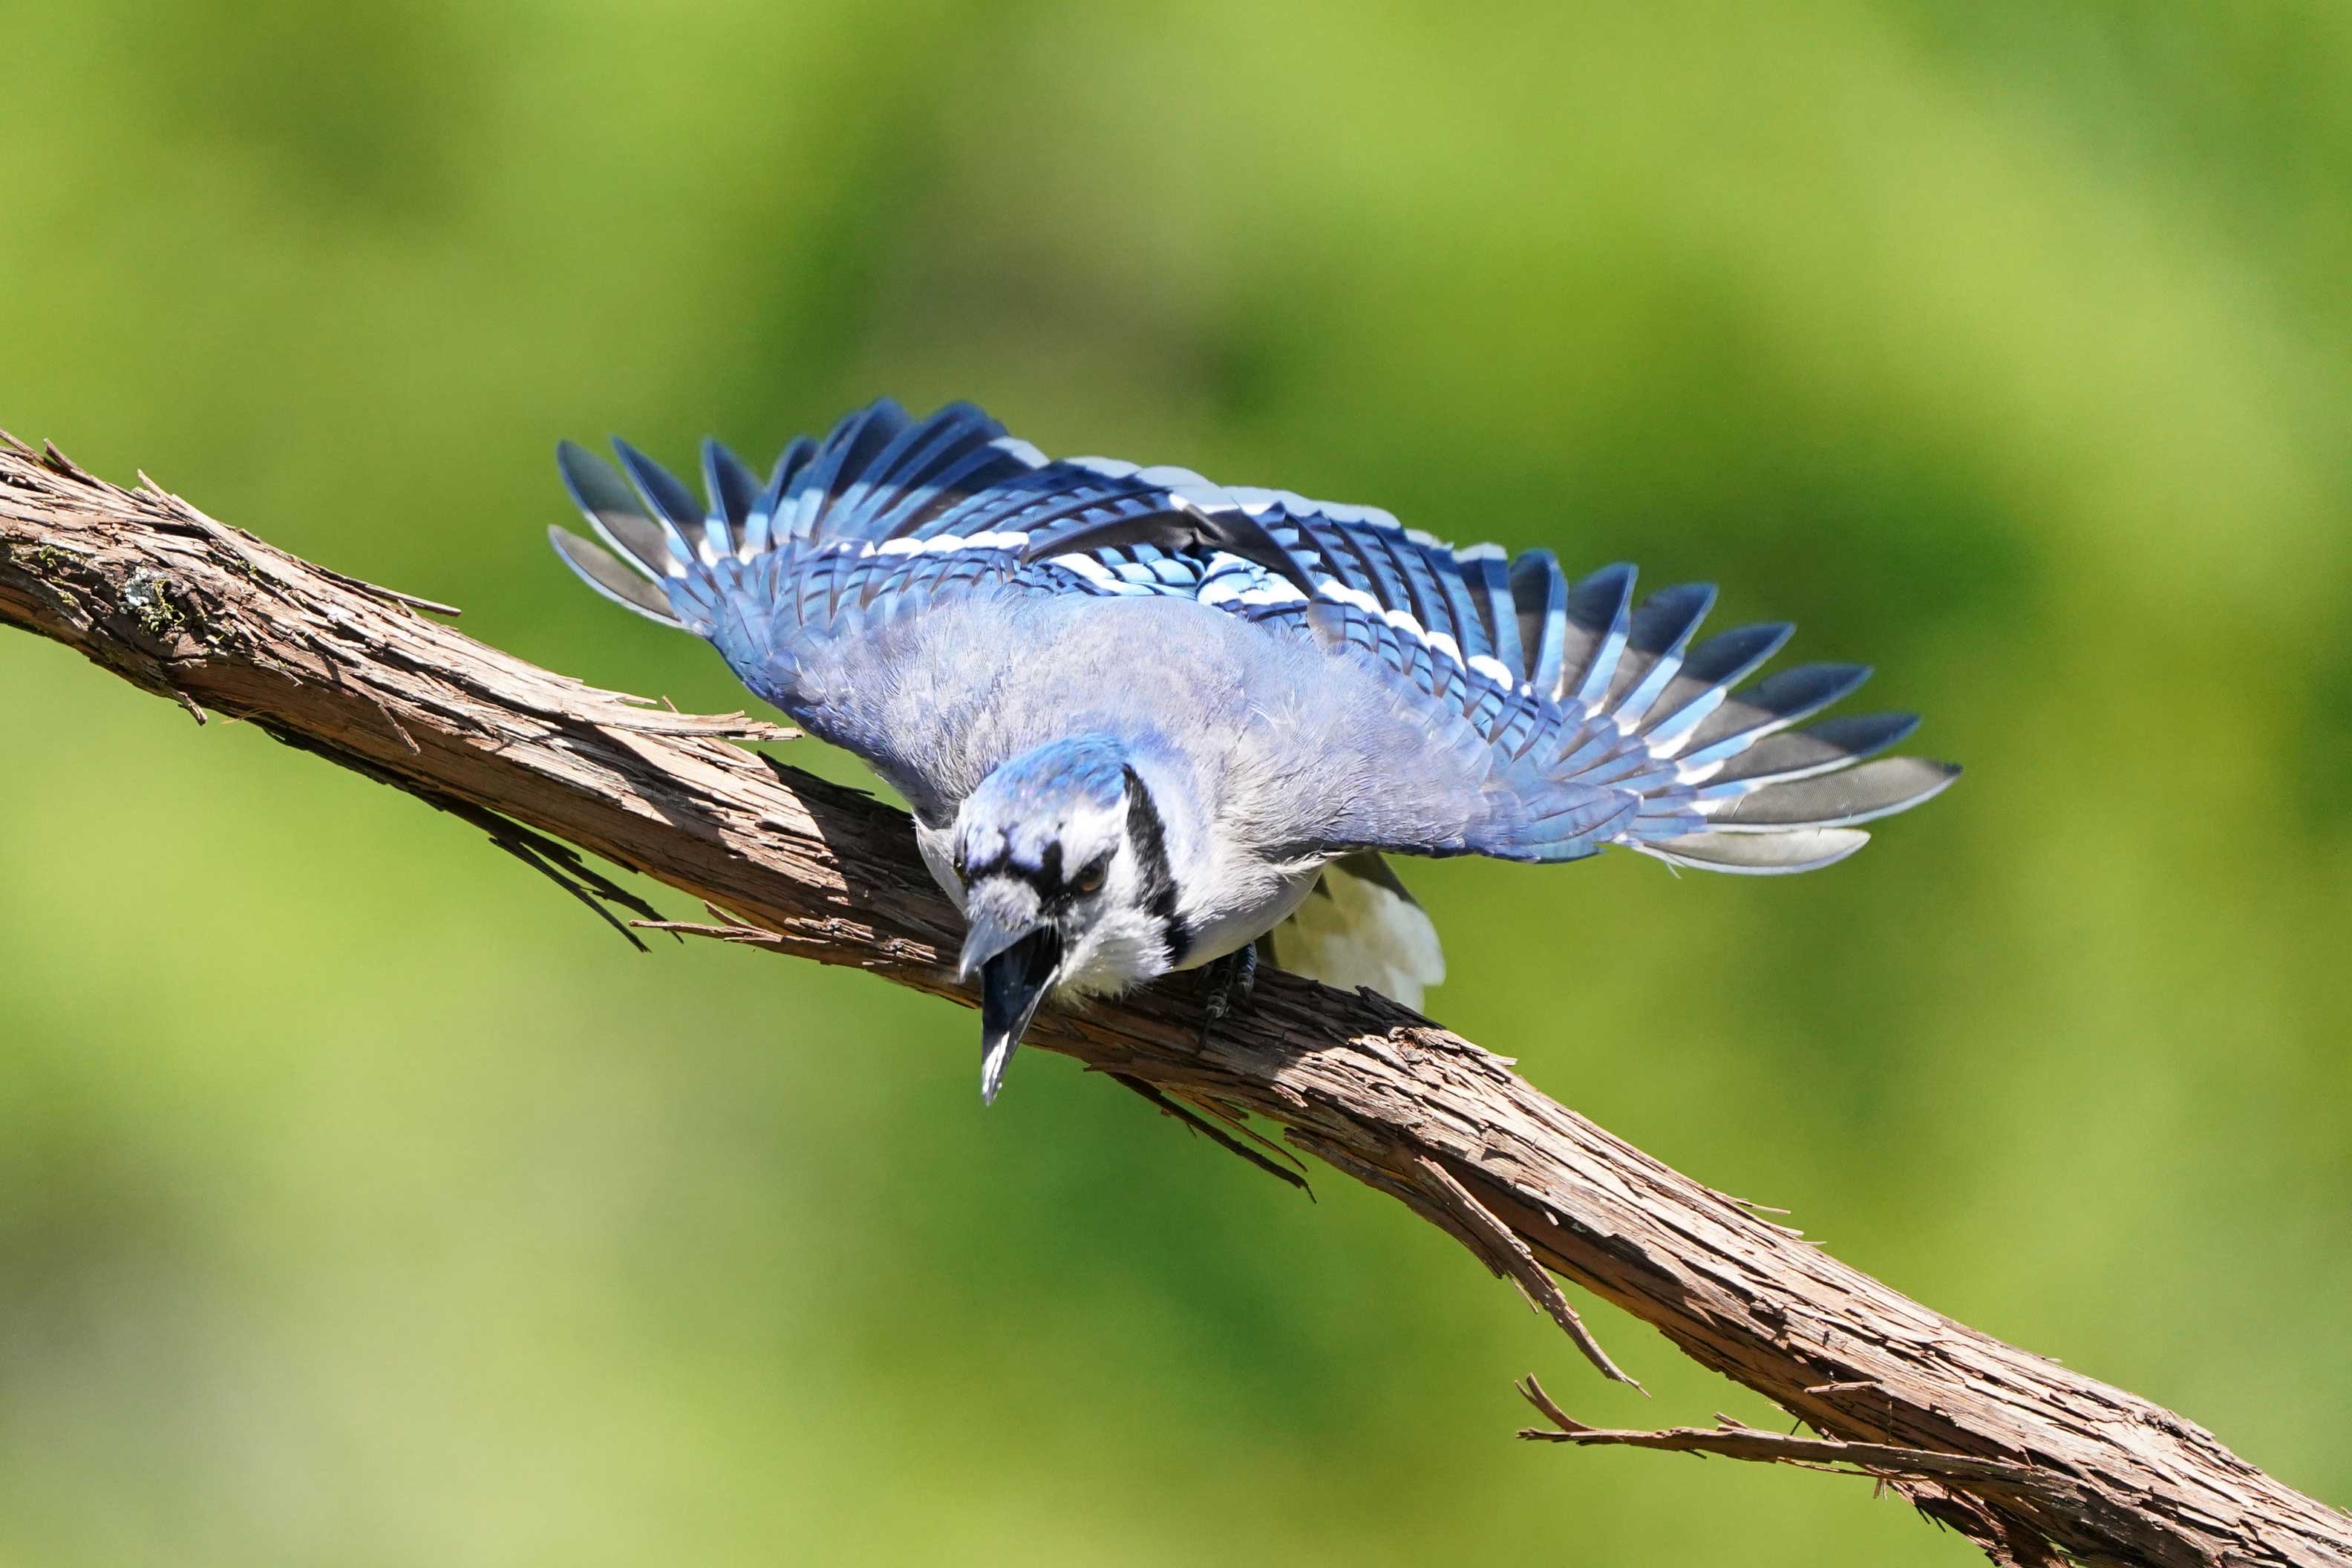 A blue jay with its mouth open on a branch.